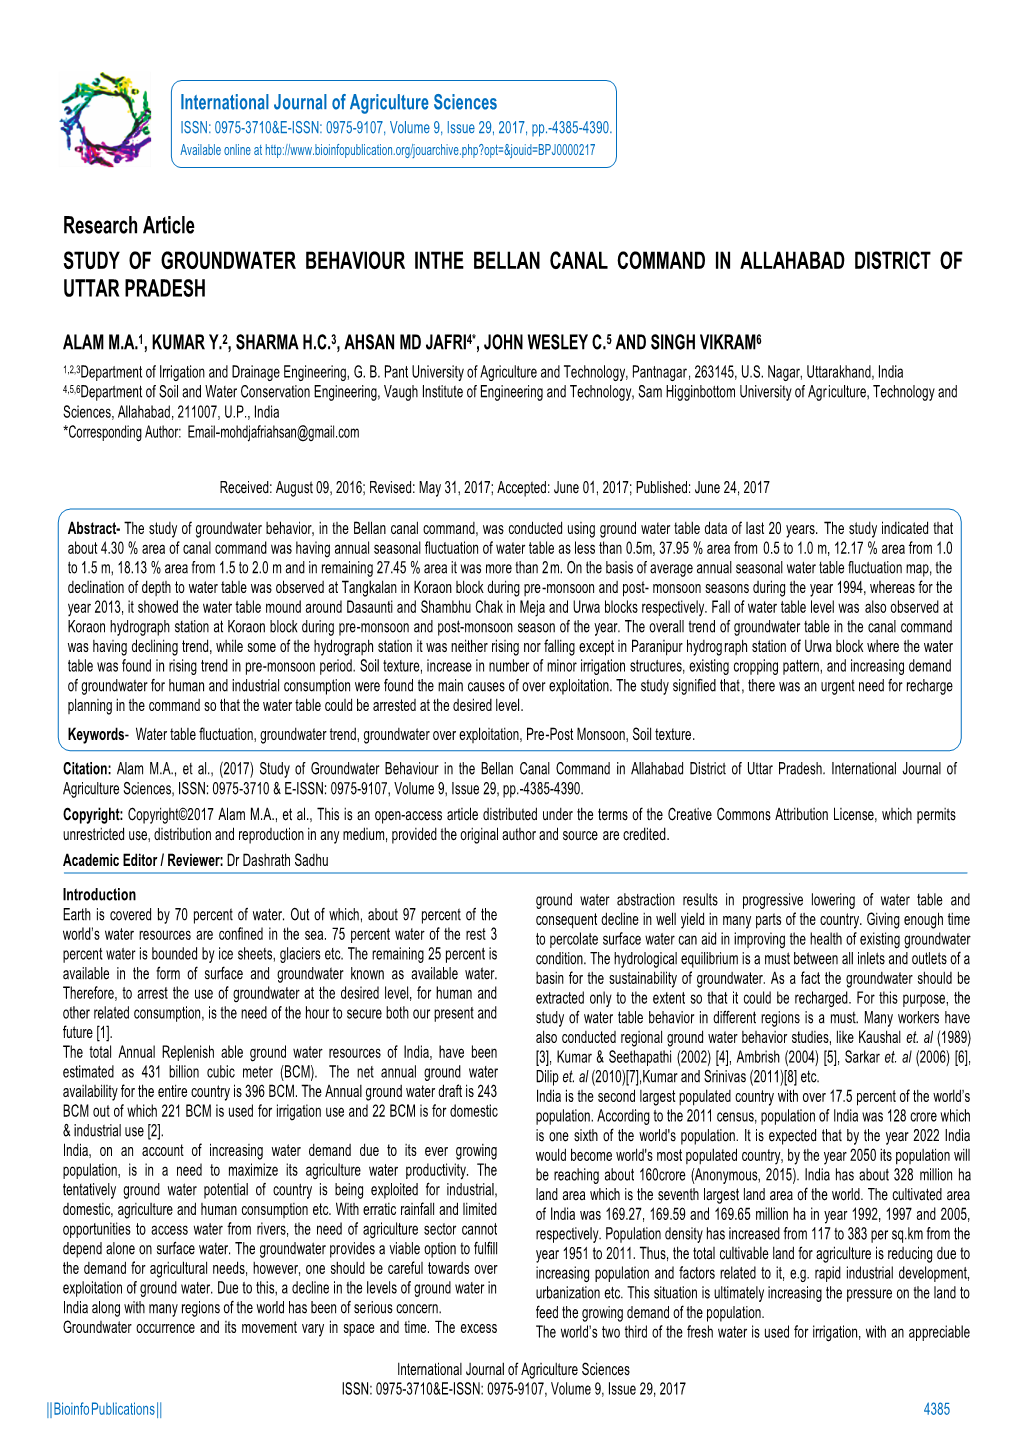 Research Article STUDY of GROUNDWATER BEHAVIOUR INTHE BELLAN CANAL COMMAND in ALLAHABAD DISTRICT of UTTAR PRADESH